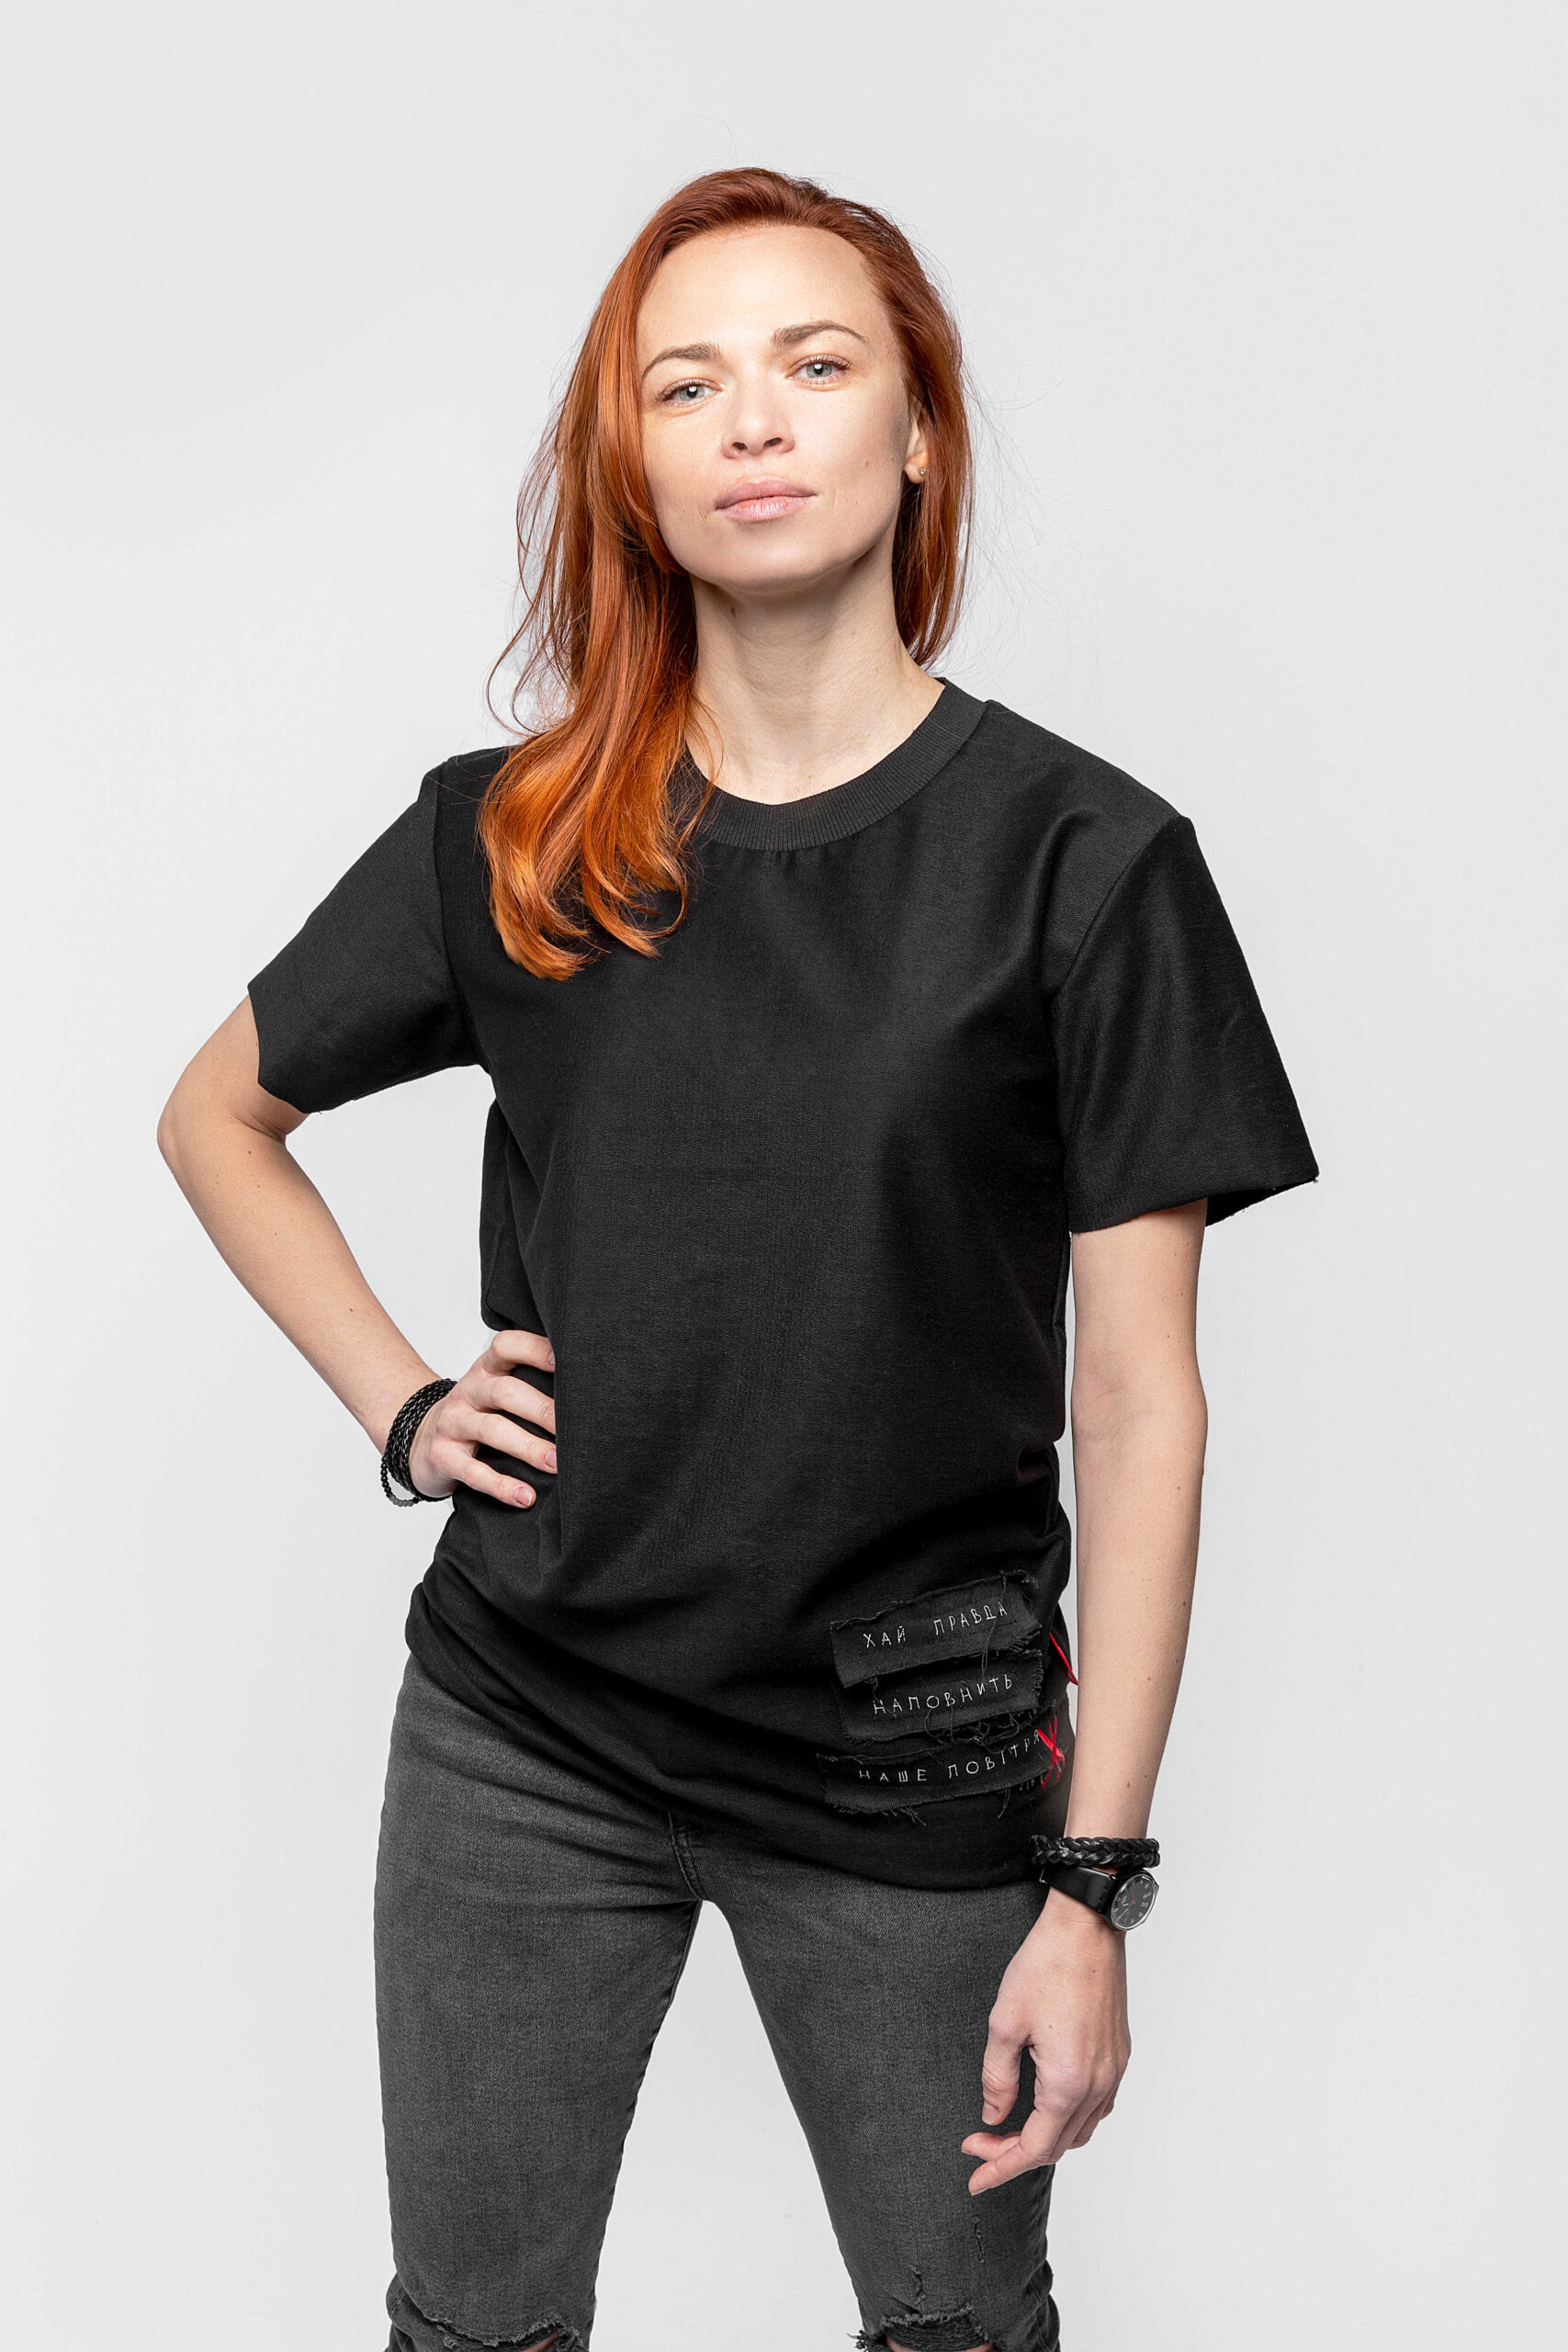 Women T-Shirt Let The Truth Fill The Air. Color black. .